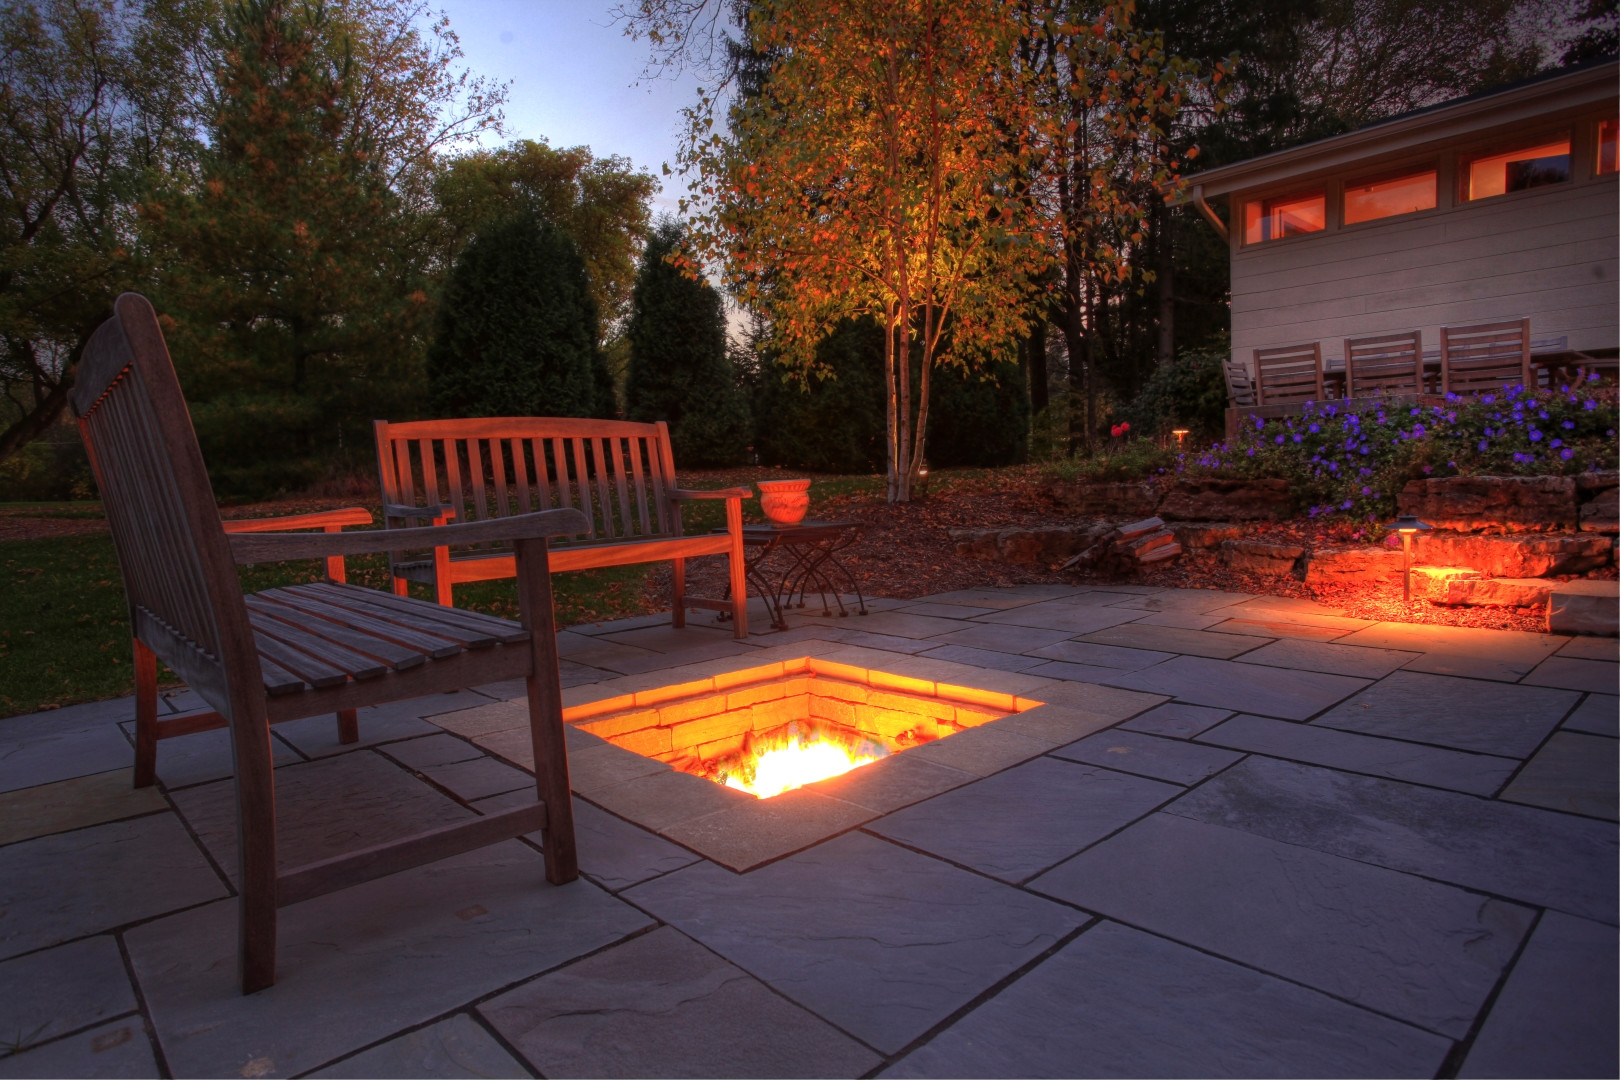 Fire pit and lighting at dusk